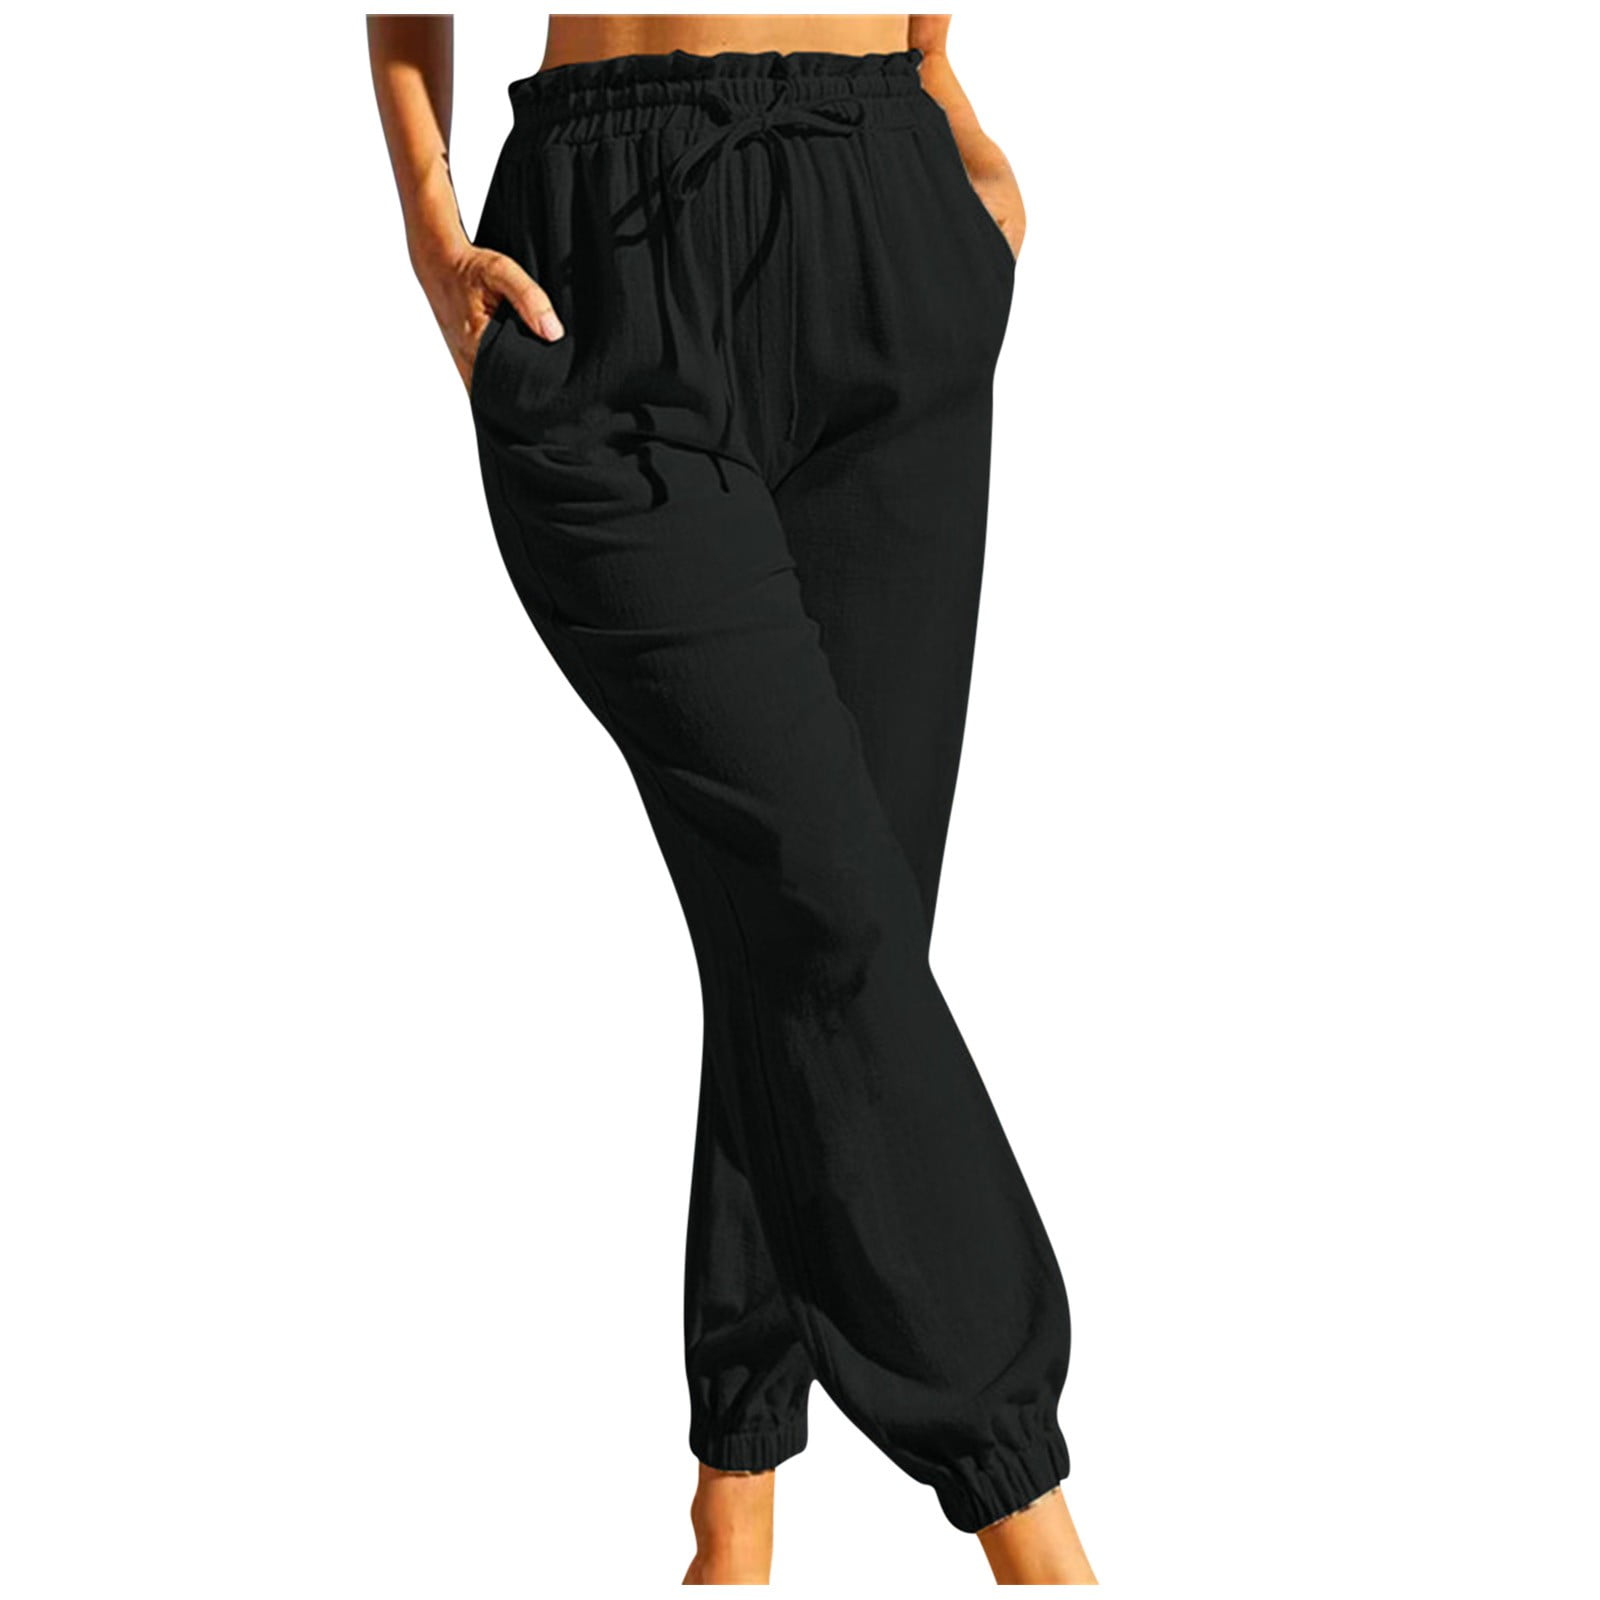 LoyisViDion Women's Elastic Trousers Plus Size Casual Solid Color ...